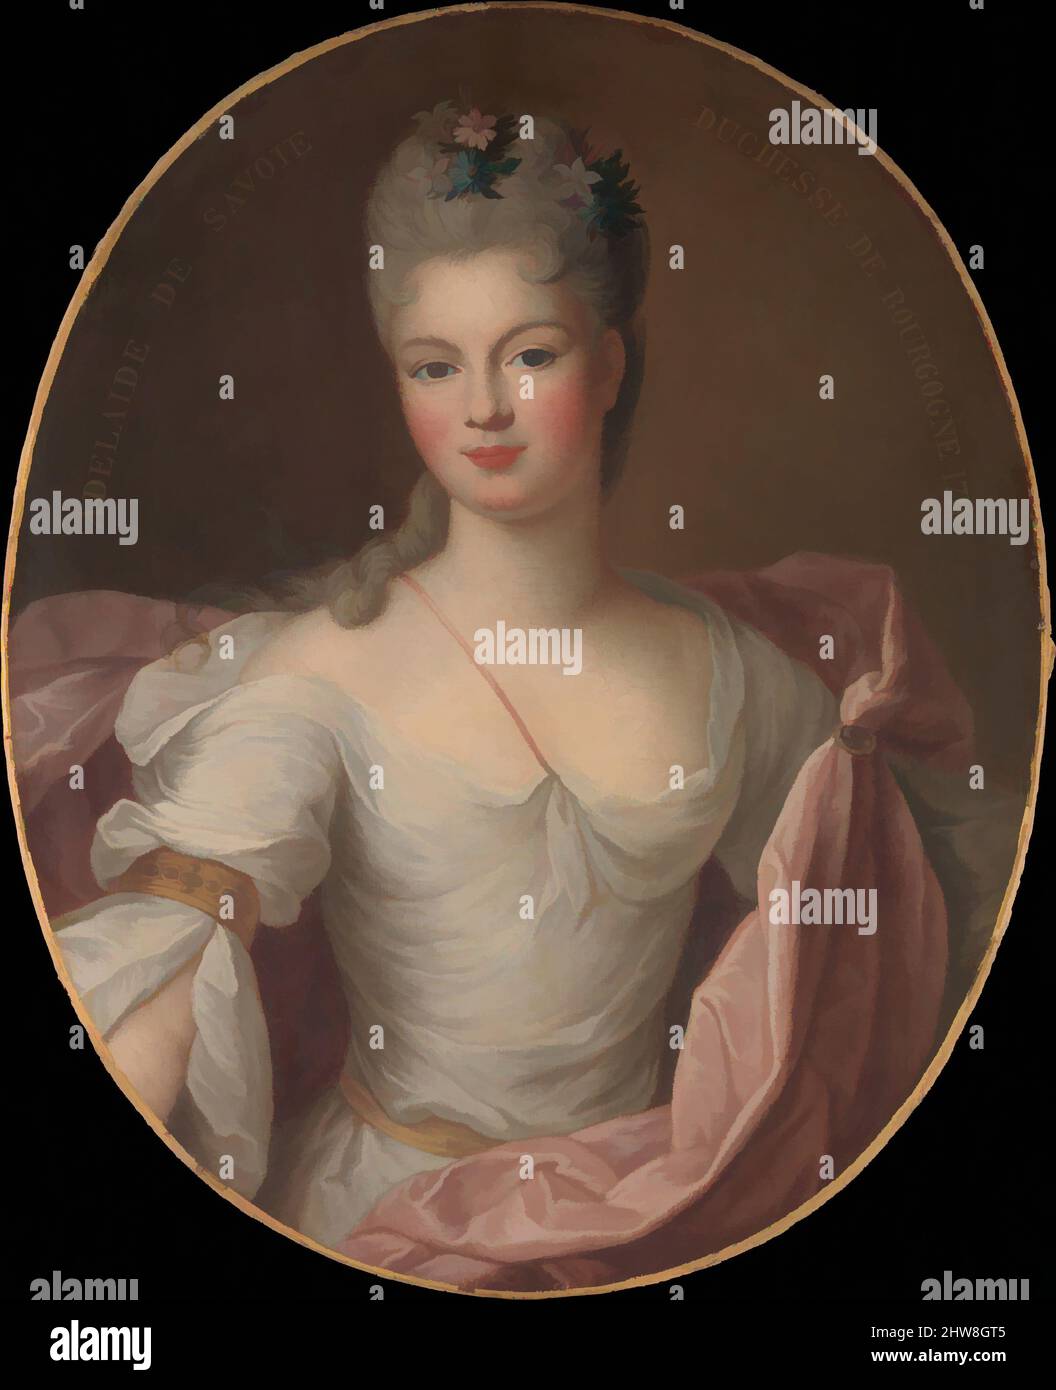 Art inspired by Marie Adélaïde de Savoie (1685–1712), Duchesse de Bourgogne, 1710, Oil on canvas, Oval, 28 3/4 x 23 1/4 in. (73 x 59.1 cm), Paintings, Pierre Gobert (French, Fontainebleau 1662–1744 Paris), Gobert was accepted as a full member of the Académie Royale de Peinture et de, Classic works modernized by Artotop with a splash of modernity. Shapes, color and value, eye-catching visual impact on art. Emotions through freedom of artworks in a contemporary way. A timeless message pursuing a wildly creative new direction. Artists turning to the digital medium and creating the Artotop NFT Stock Photo